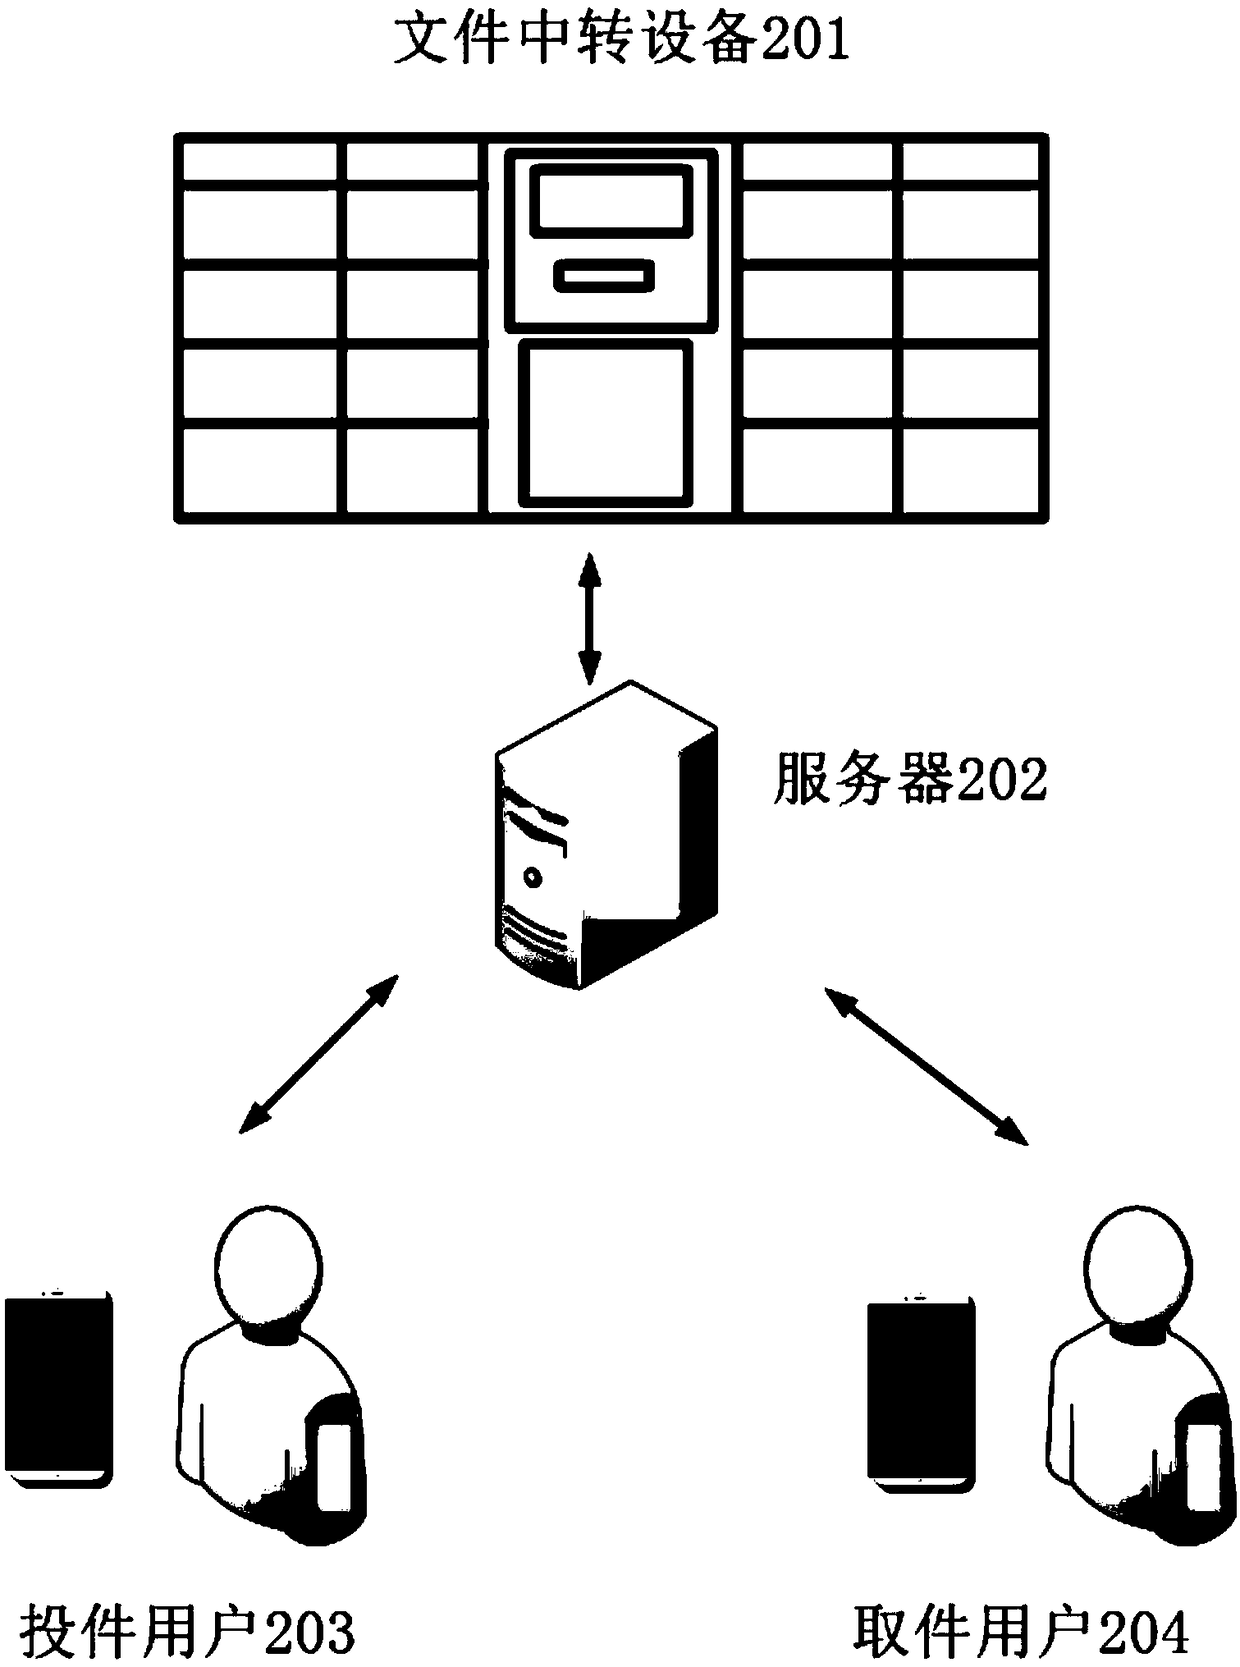 File transfer device, server and management terminal